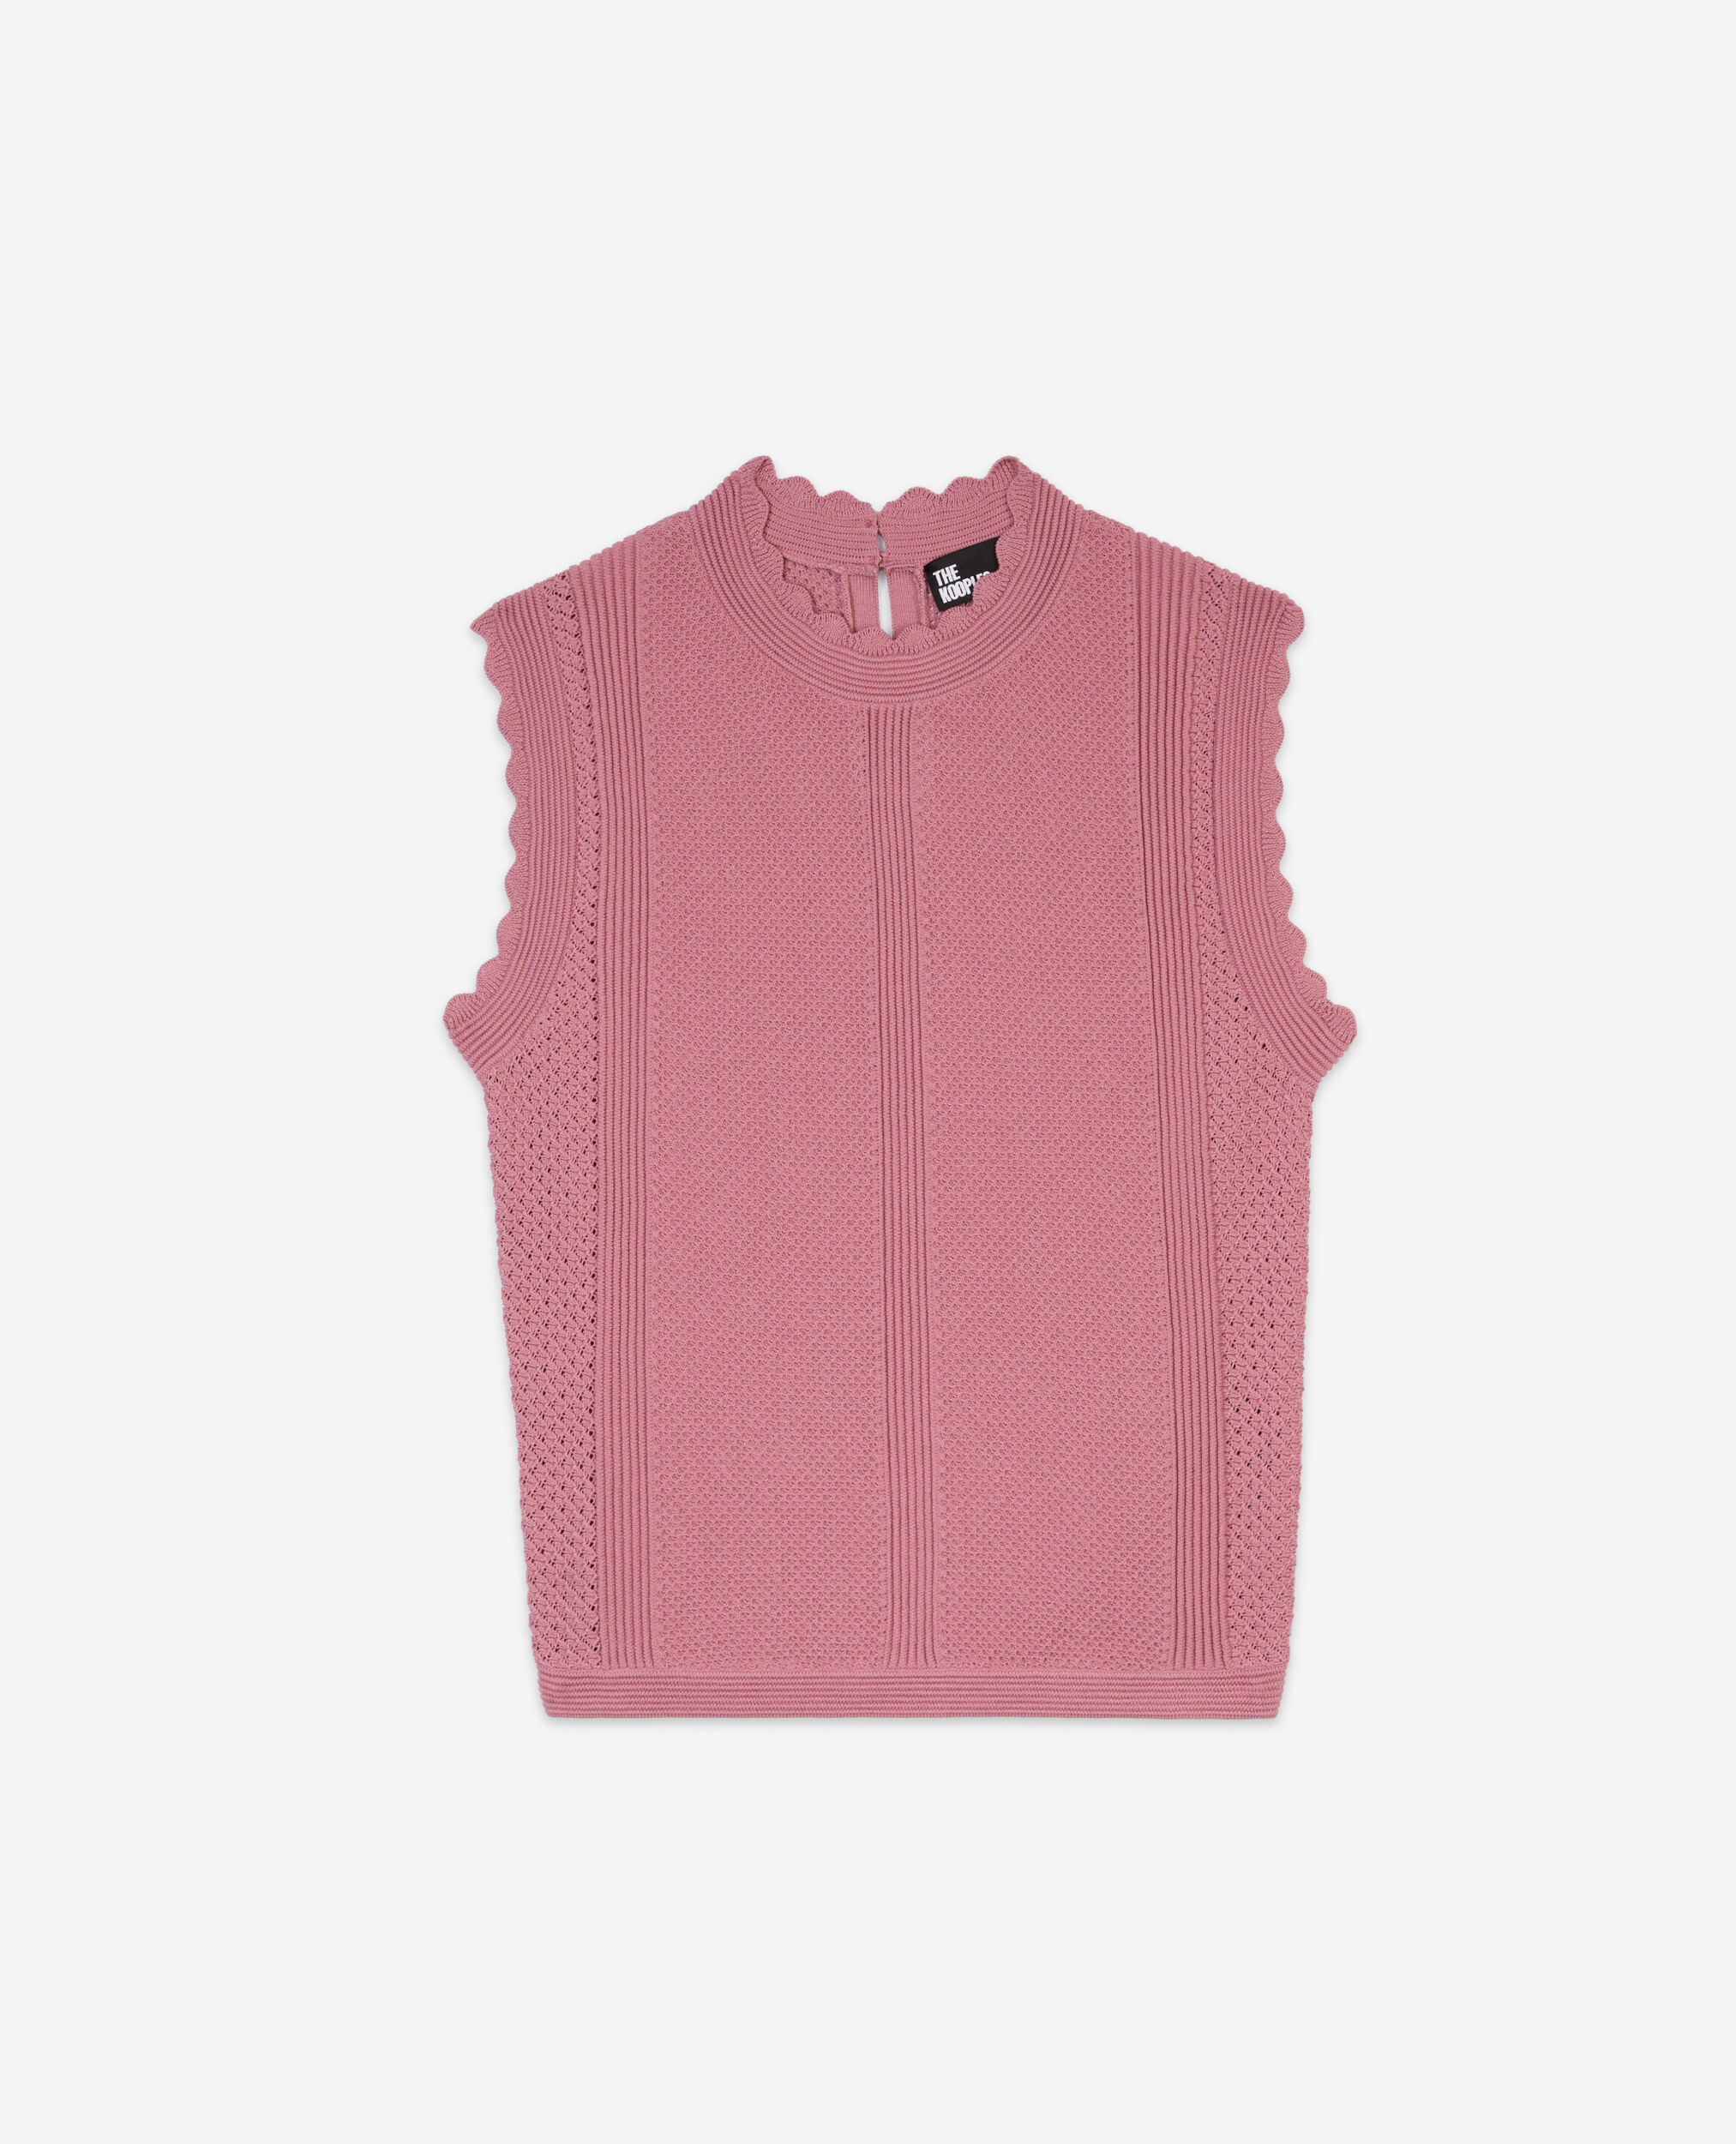 Lilac openwork knit top, PINK WOOD, hi-res image number null